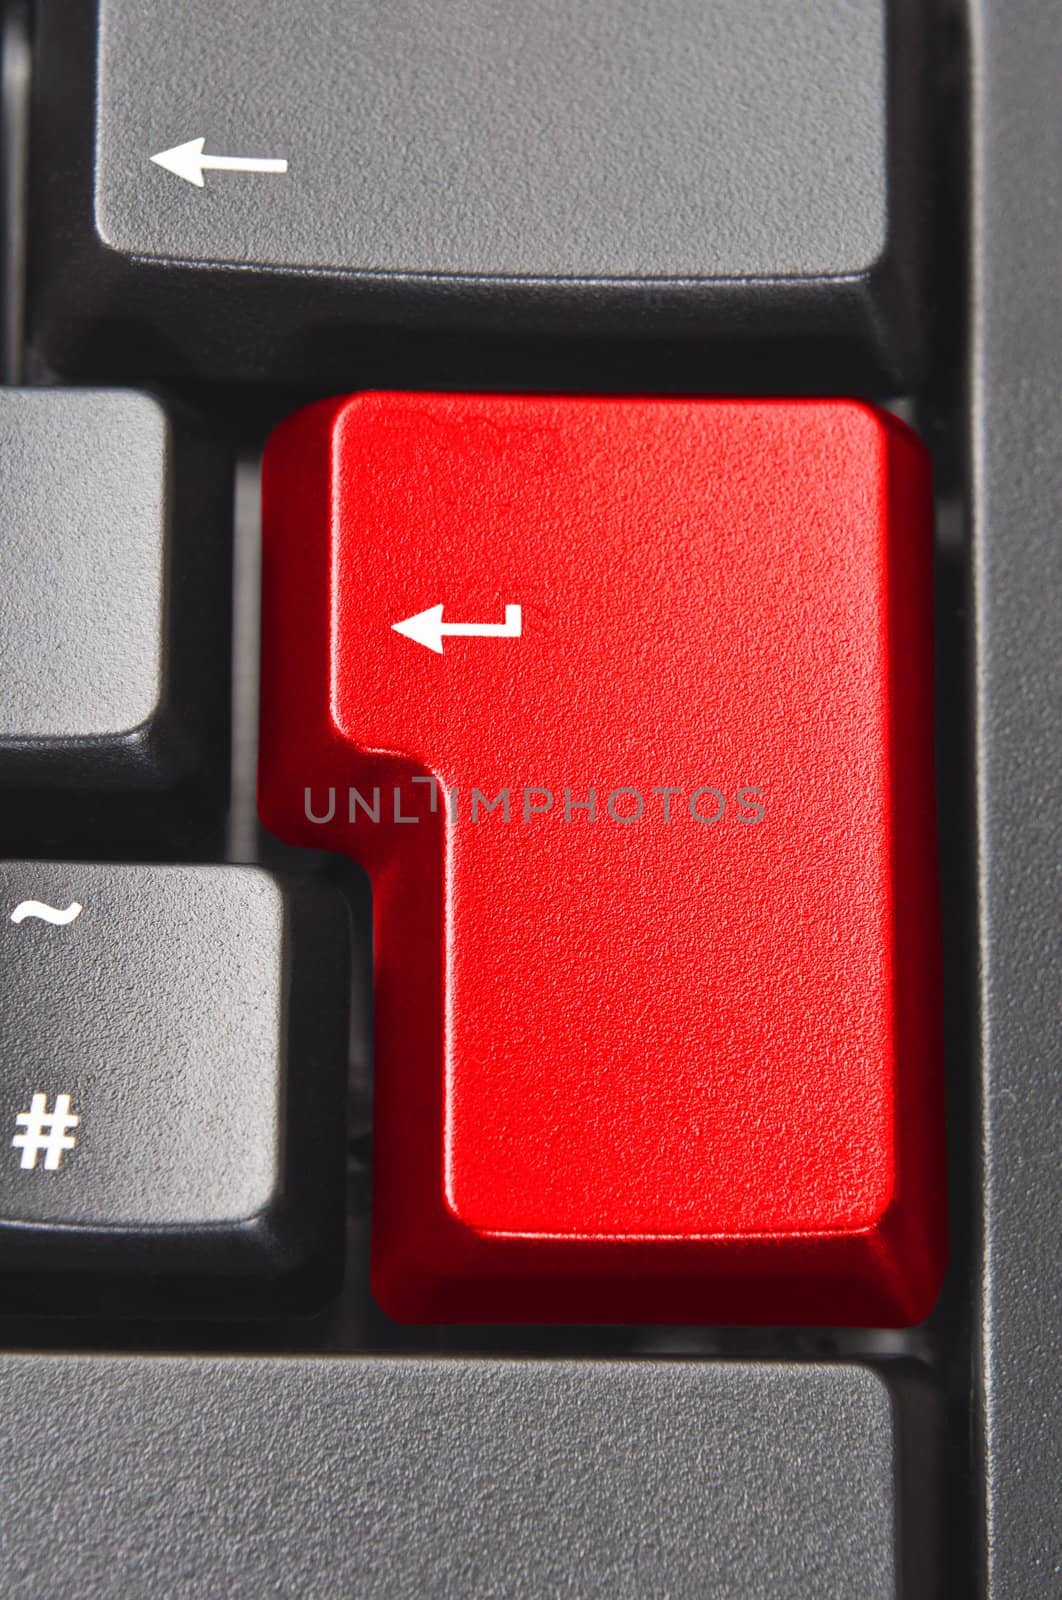 Close up (macro) shot of the 'Enter' aka 'Return' key on a black computer keyboard.  Coloured red with original word removed.